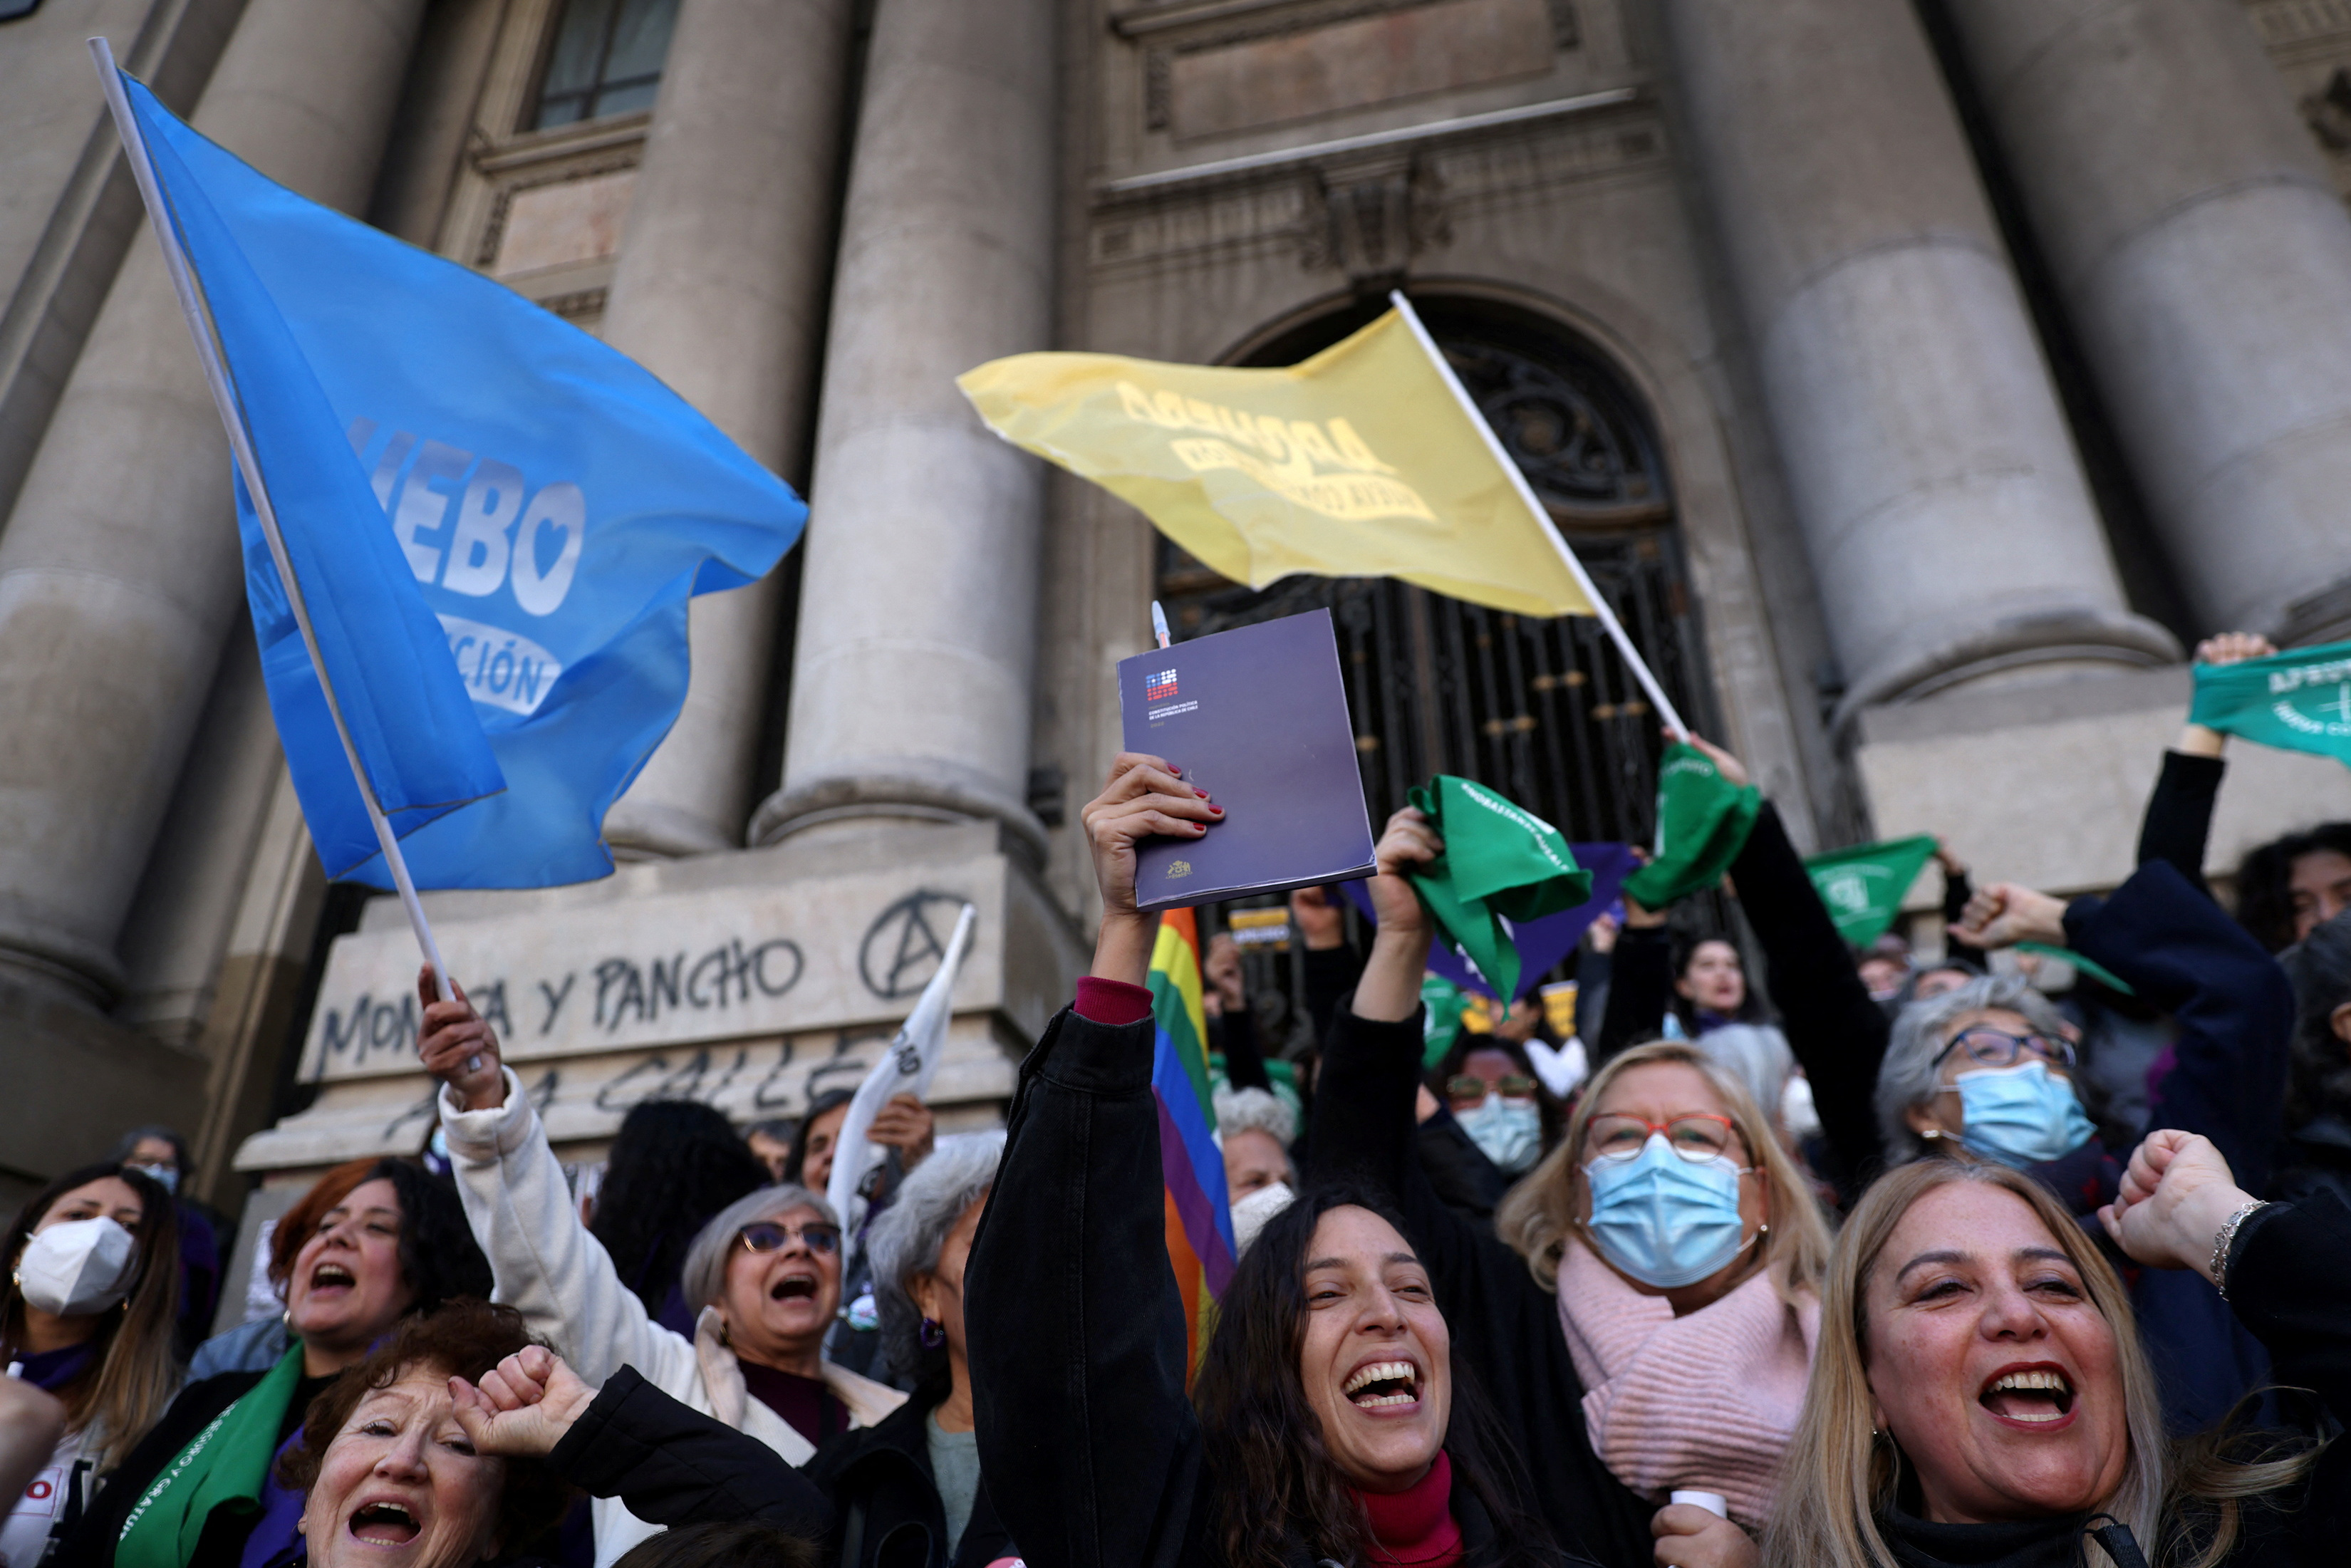 Demonstrators gather in support for the proposed new constitution, in Santiago